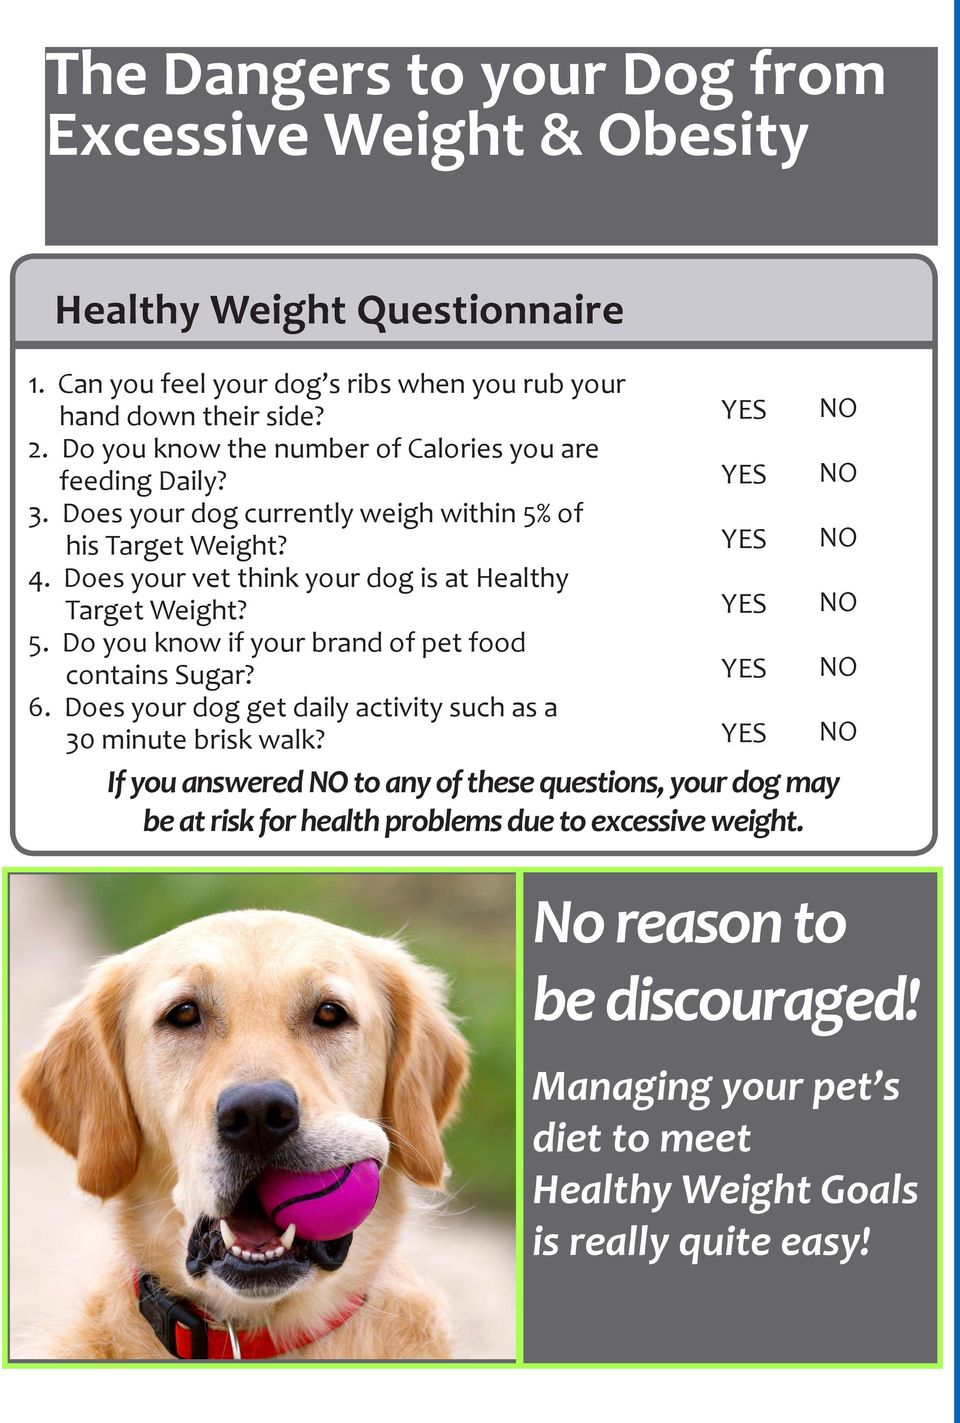 Does your vet think your dog is at Healthy Target Weight? 5. Do you know if your brand of pet food contains Sugar? 6.